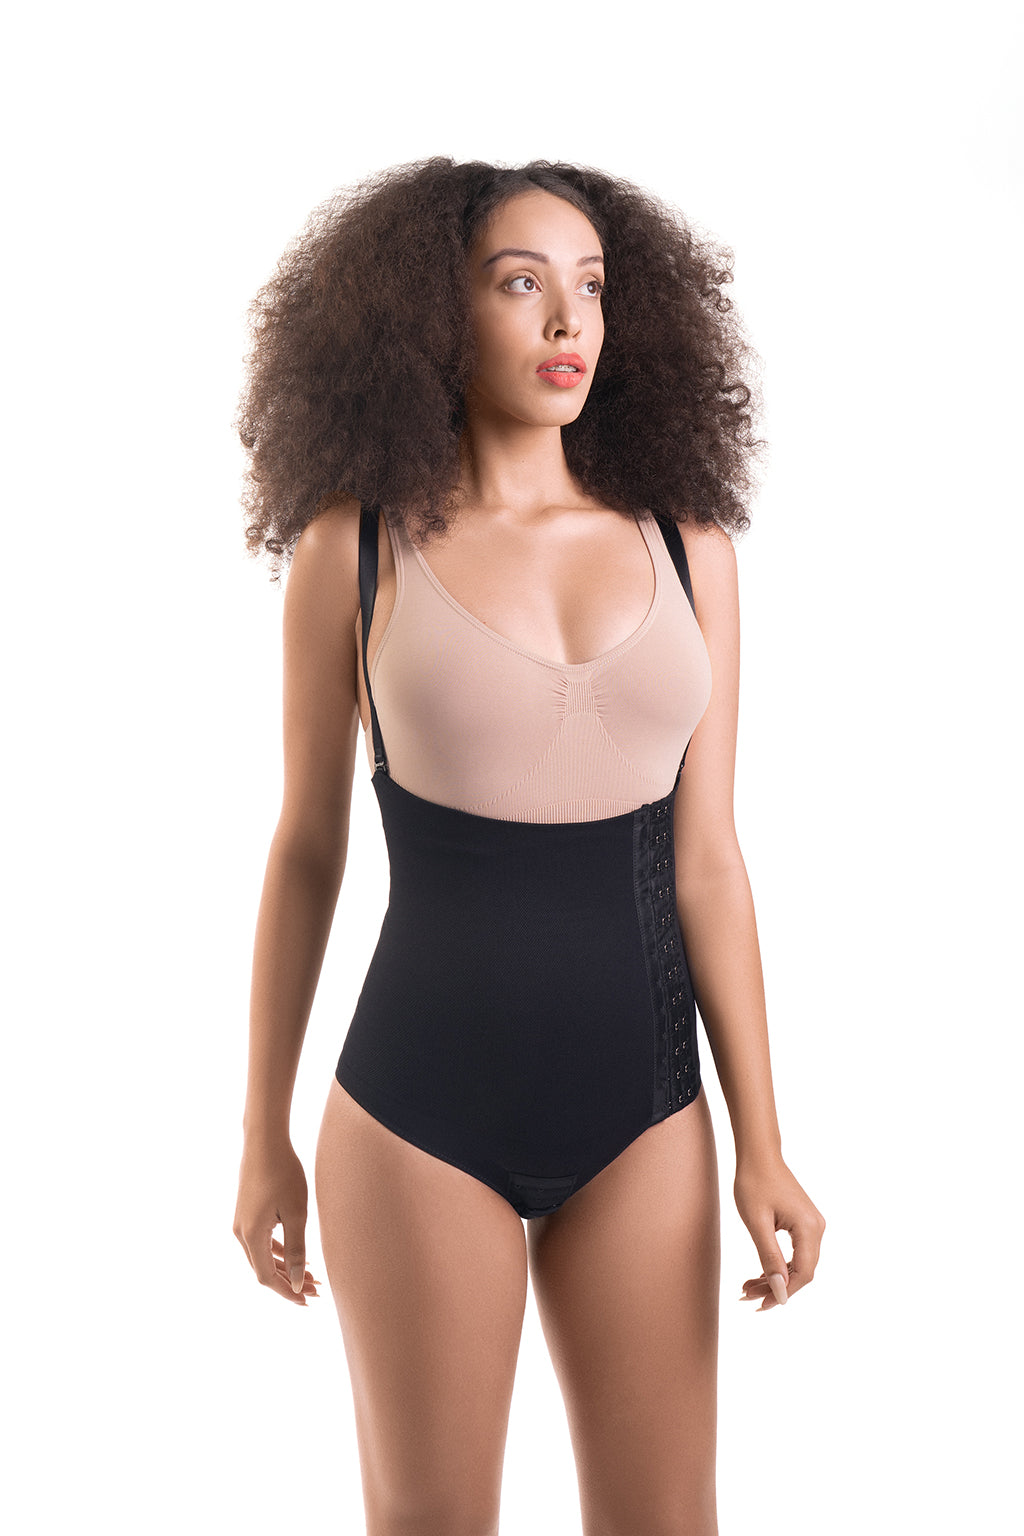 Loola Compression Aesthetic Waist Corset with Side Opening